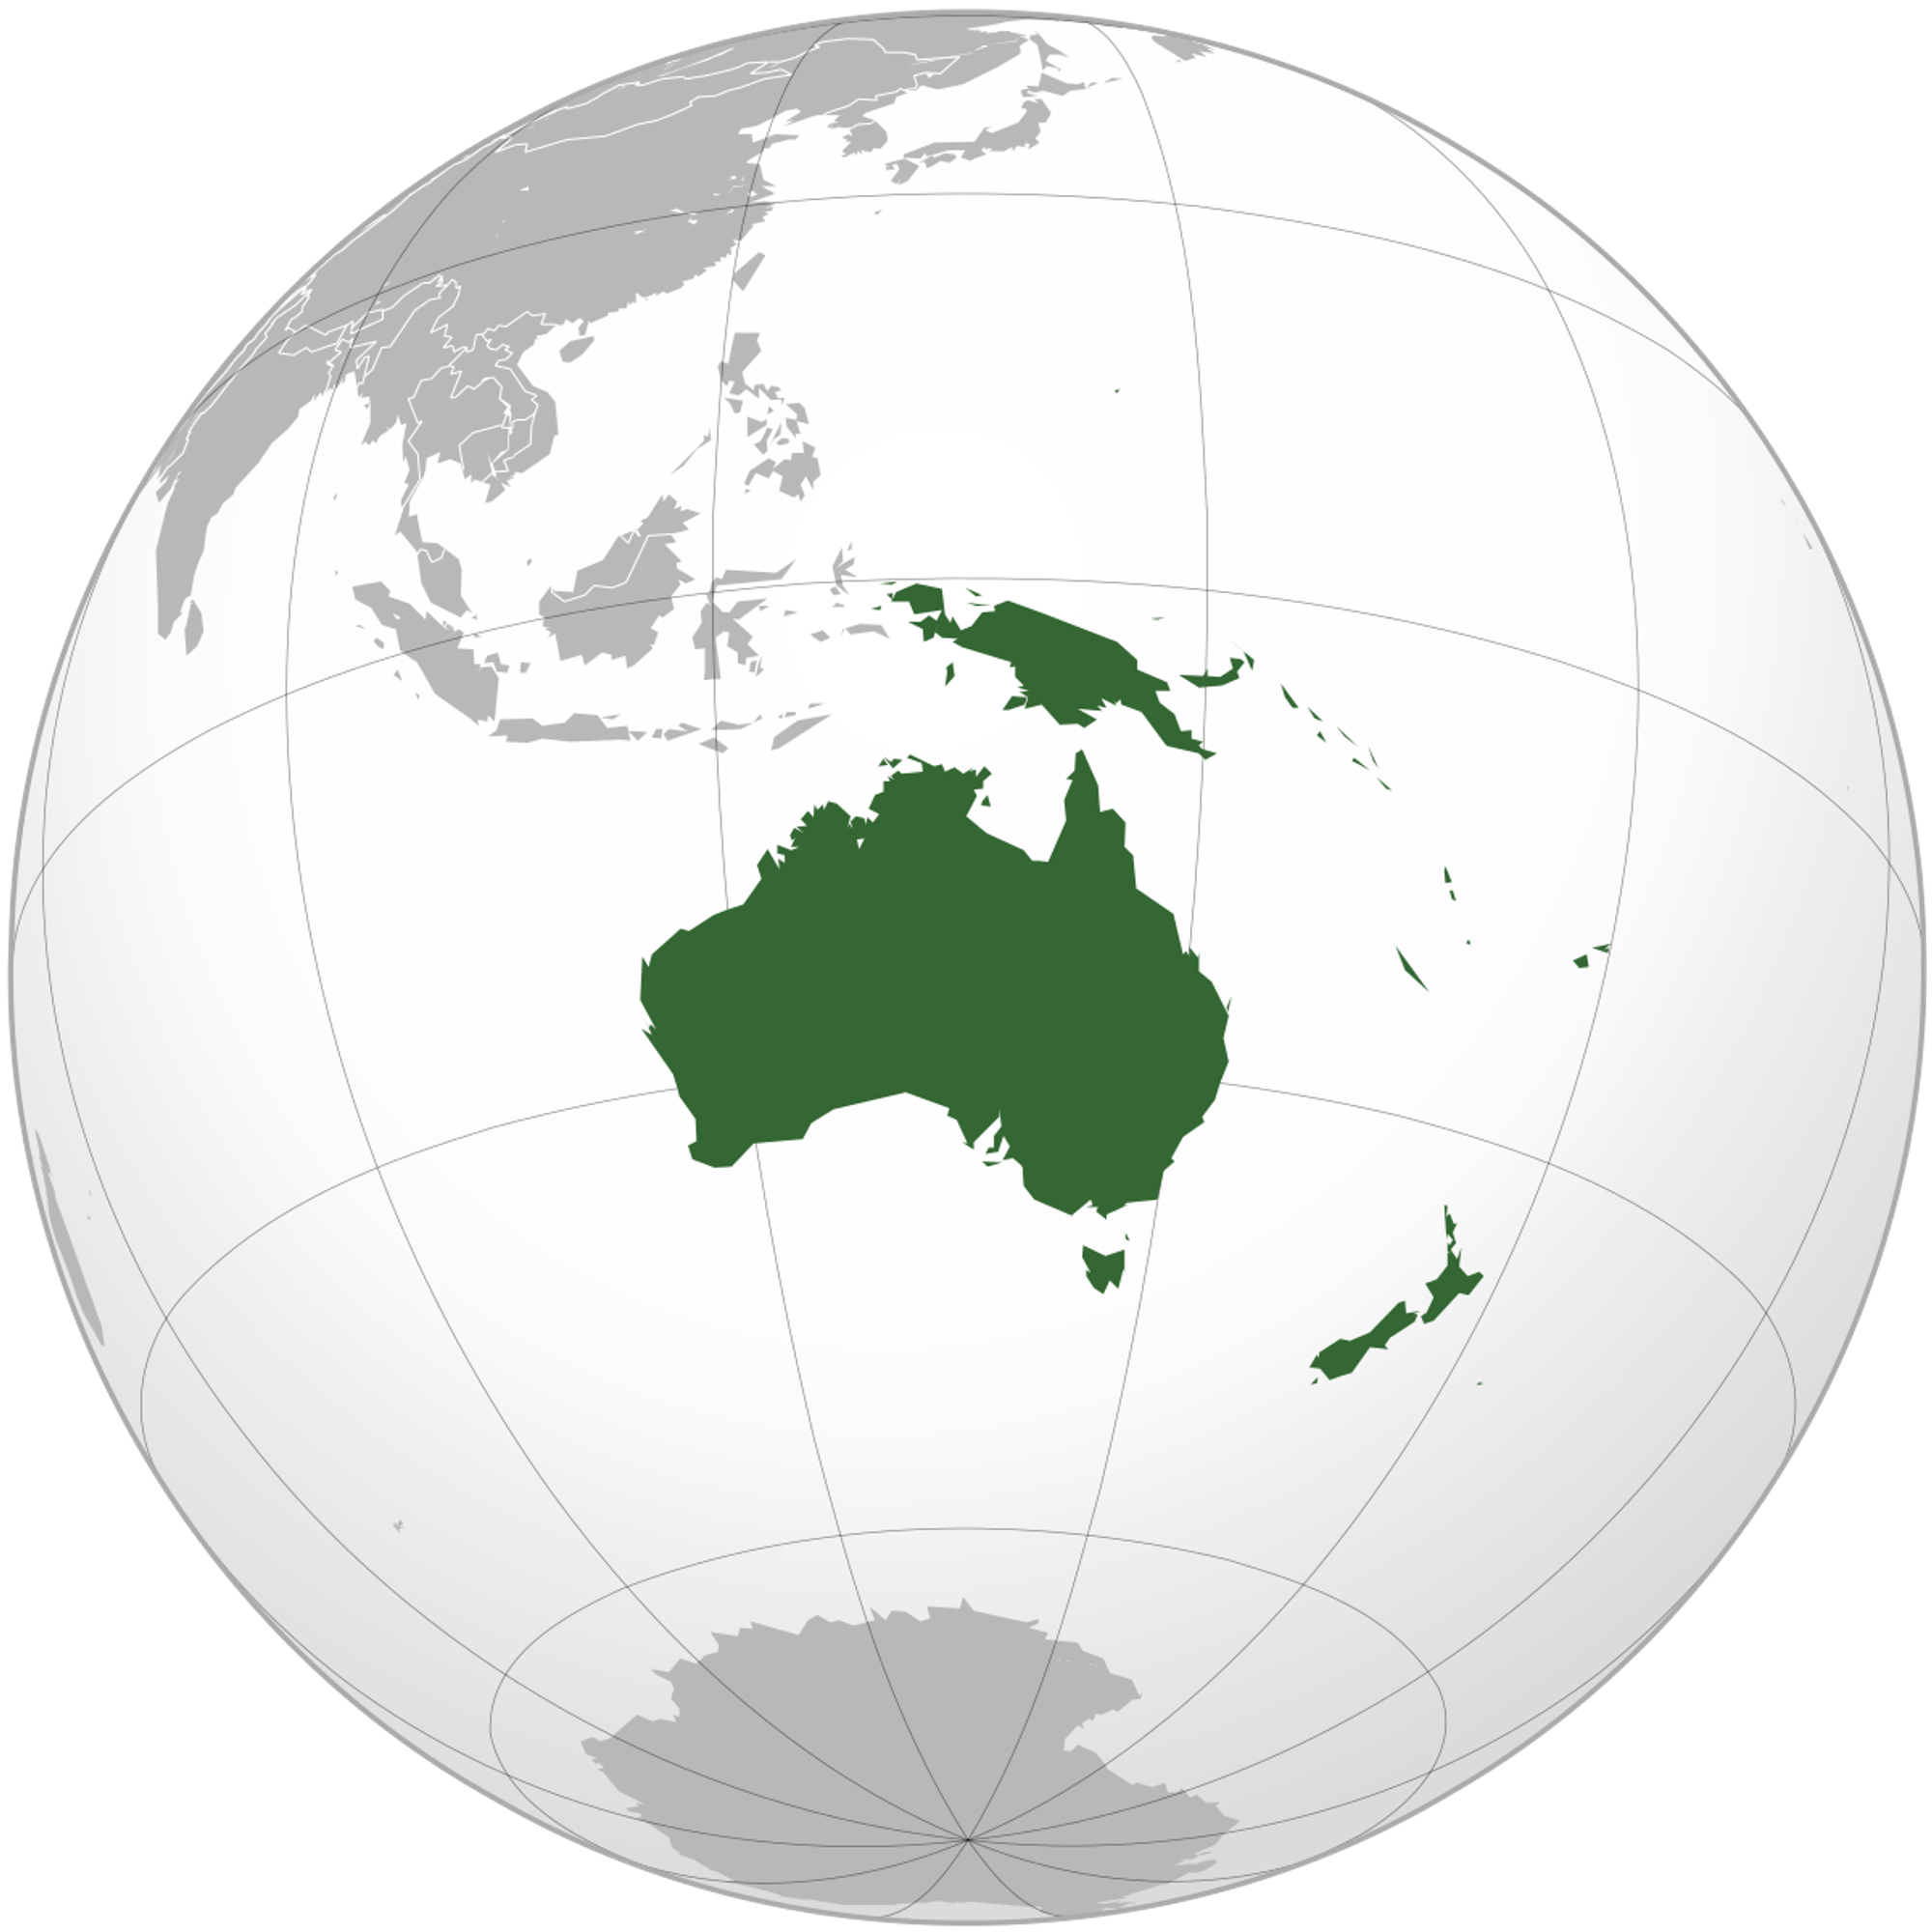 https://upload.wikimedia.org/wikipedia/commons/thumb/8/8e/Oceania_%28orthographic_projection%29.svg/1200px-Oceania_%28orthographic_projection%29.svg.png